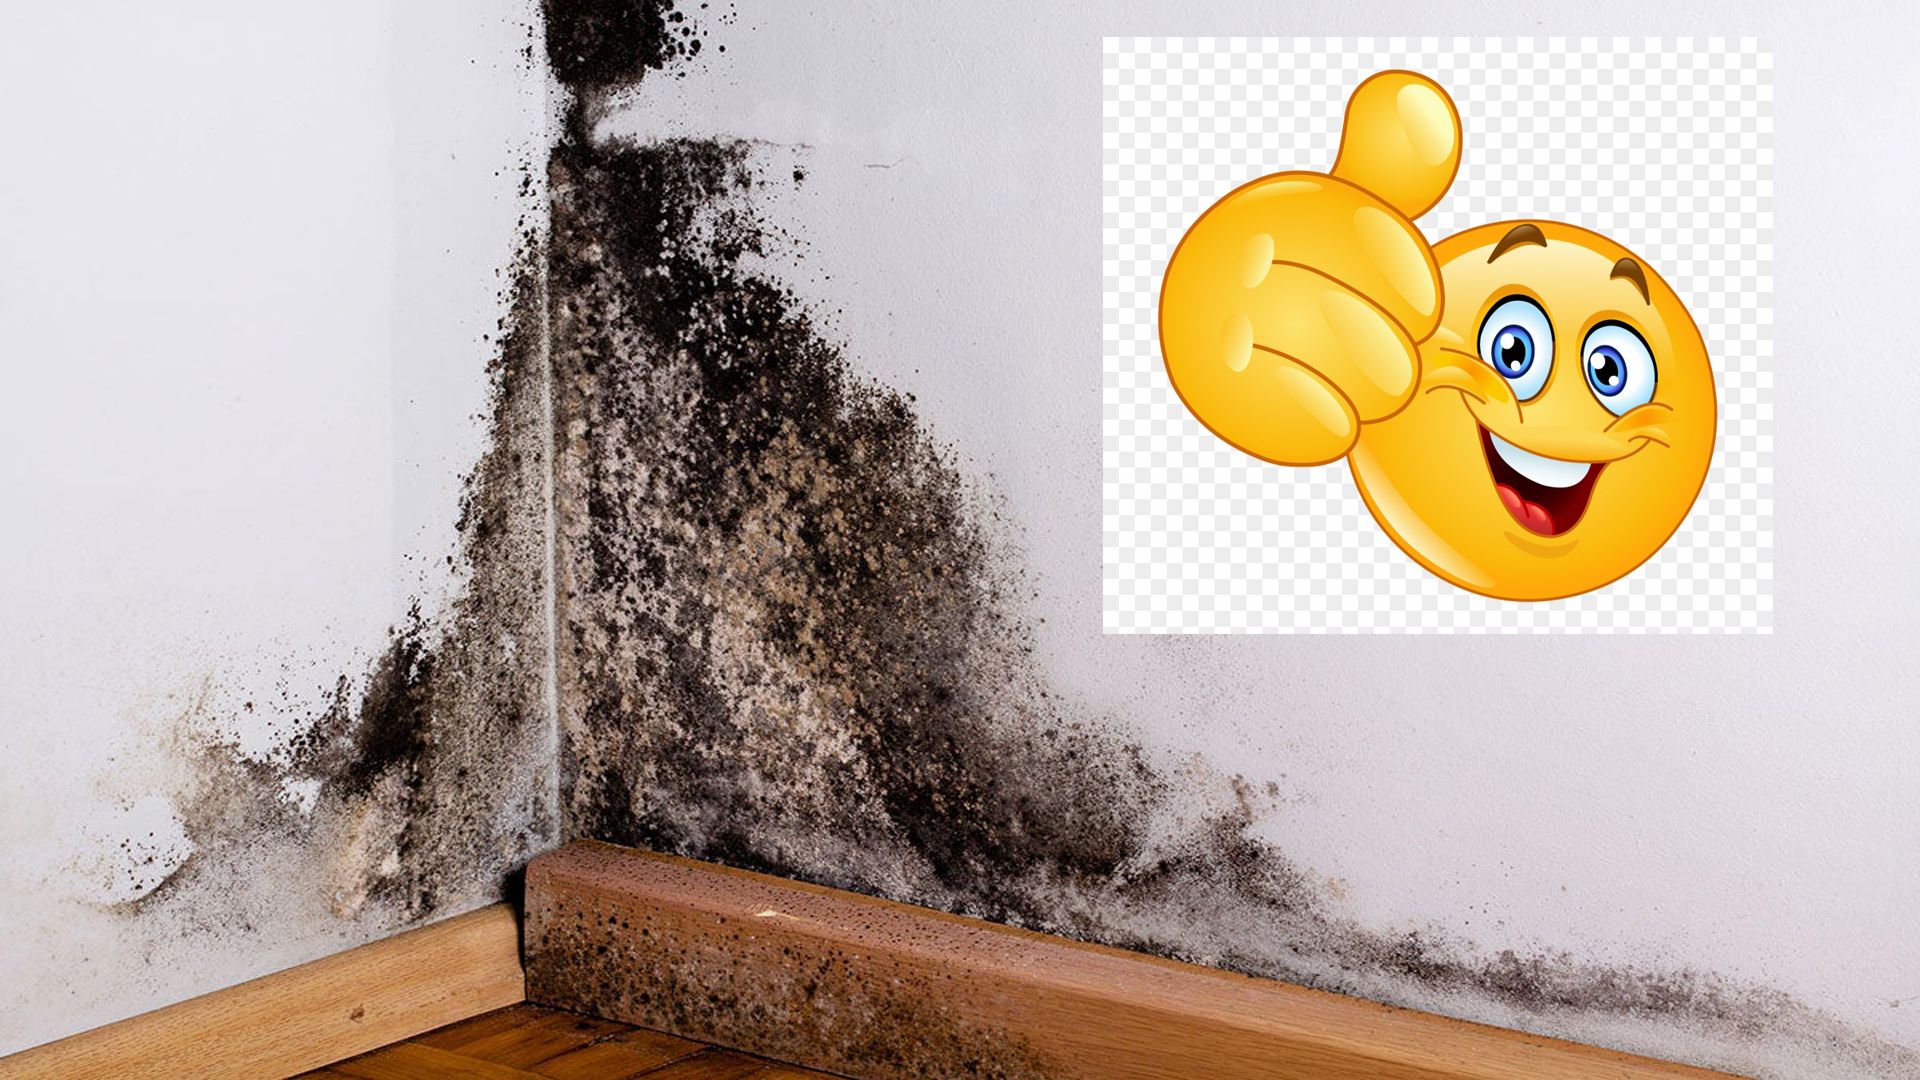 Black Mold Exposure Actually Very Good For You, Makes You Happy And Live Longer Actually, Study Finds